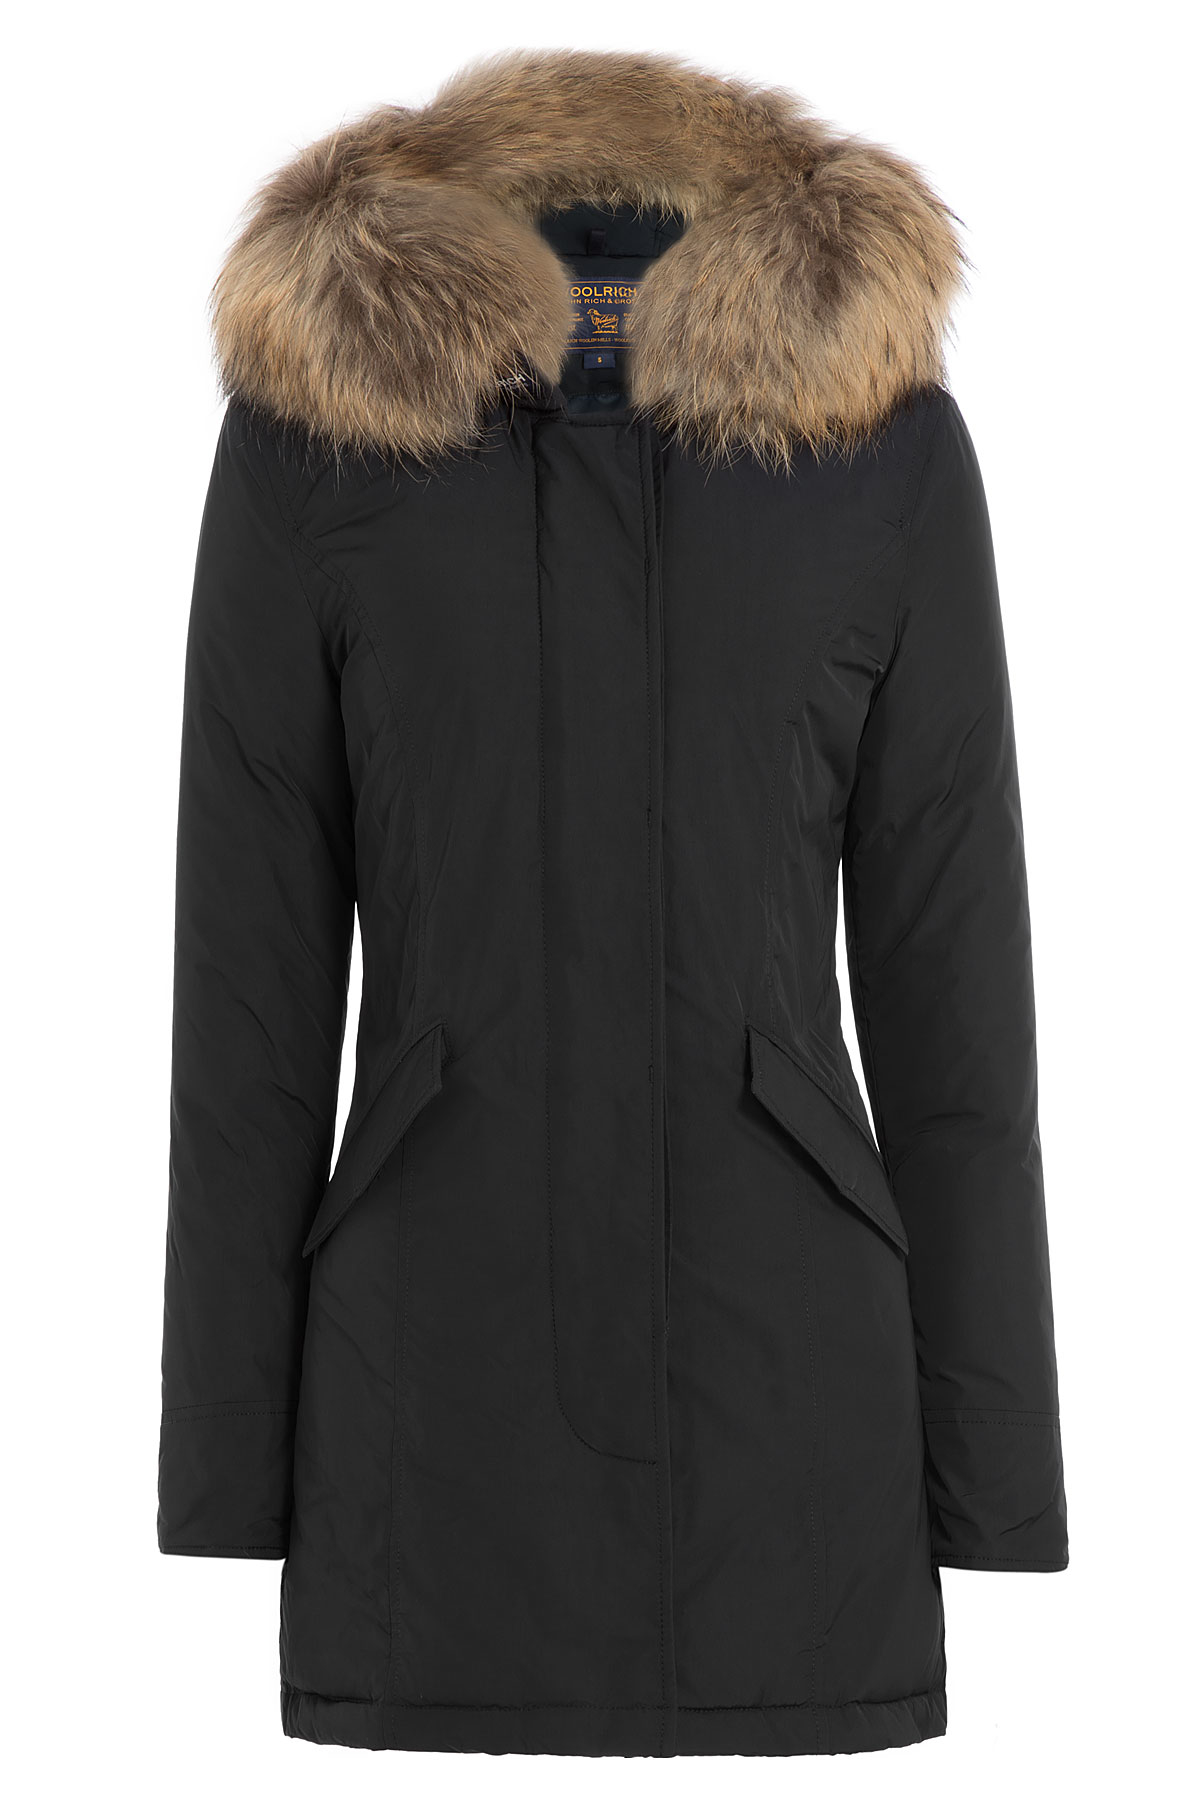 Lyst - Woolrich Down Jacket With Fur-trimmed Collar in Black